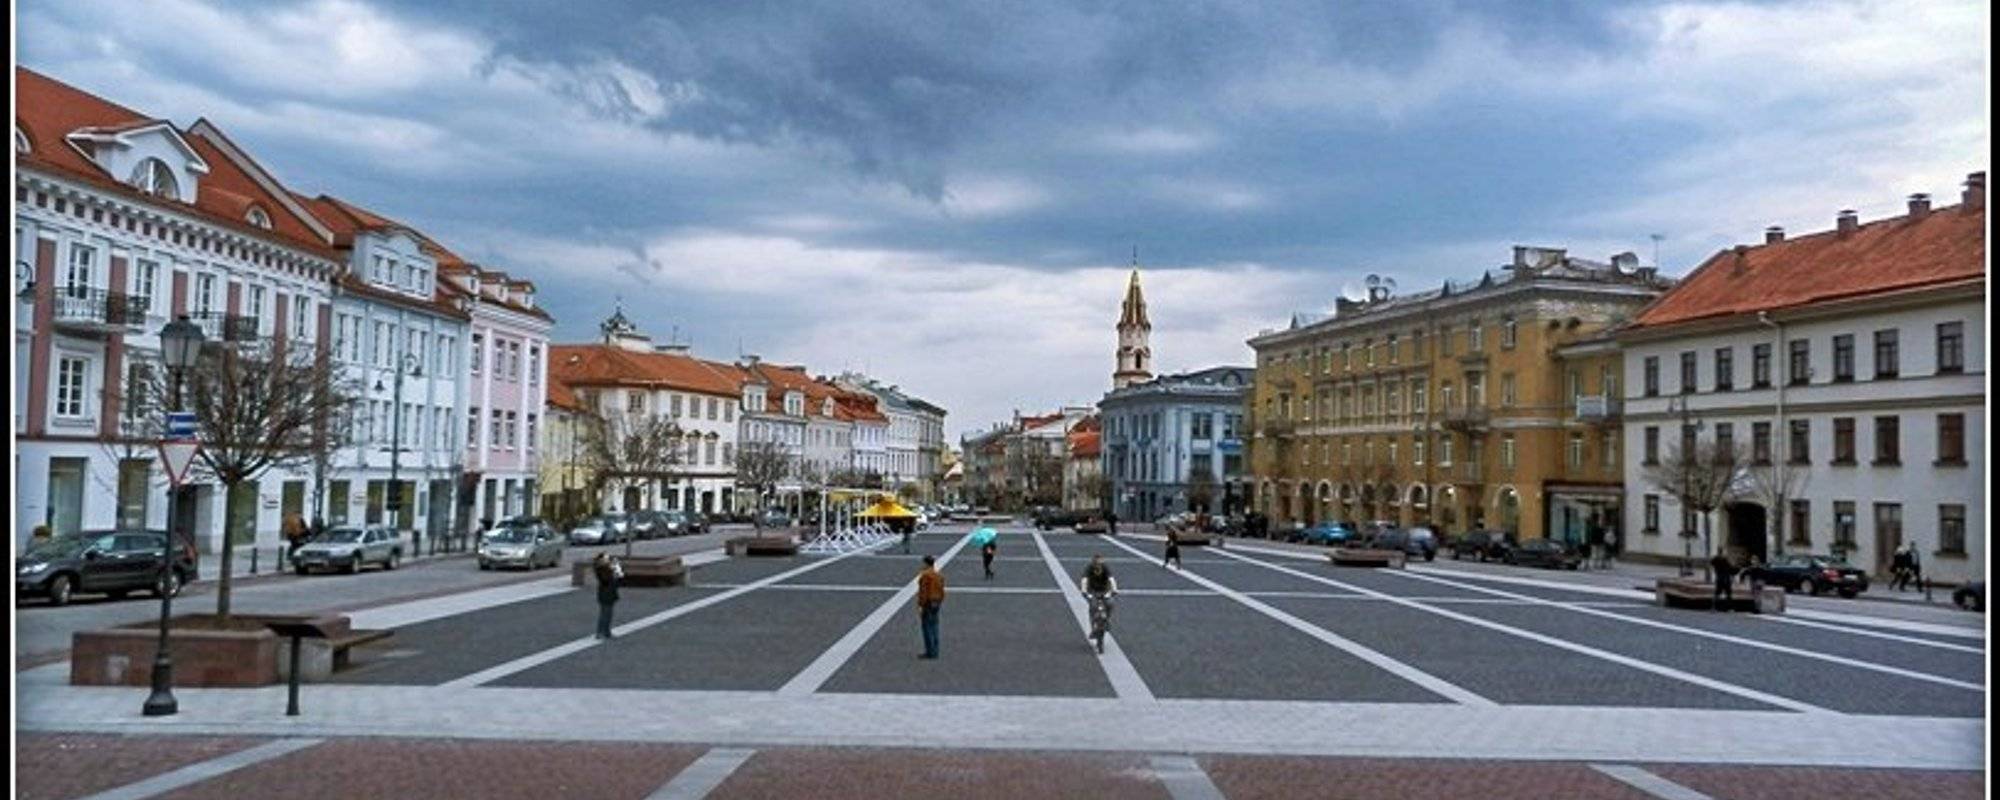 Vilnius, Lithuania - Looking for something to do? Basic guide to the place.